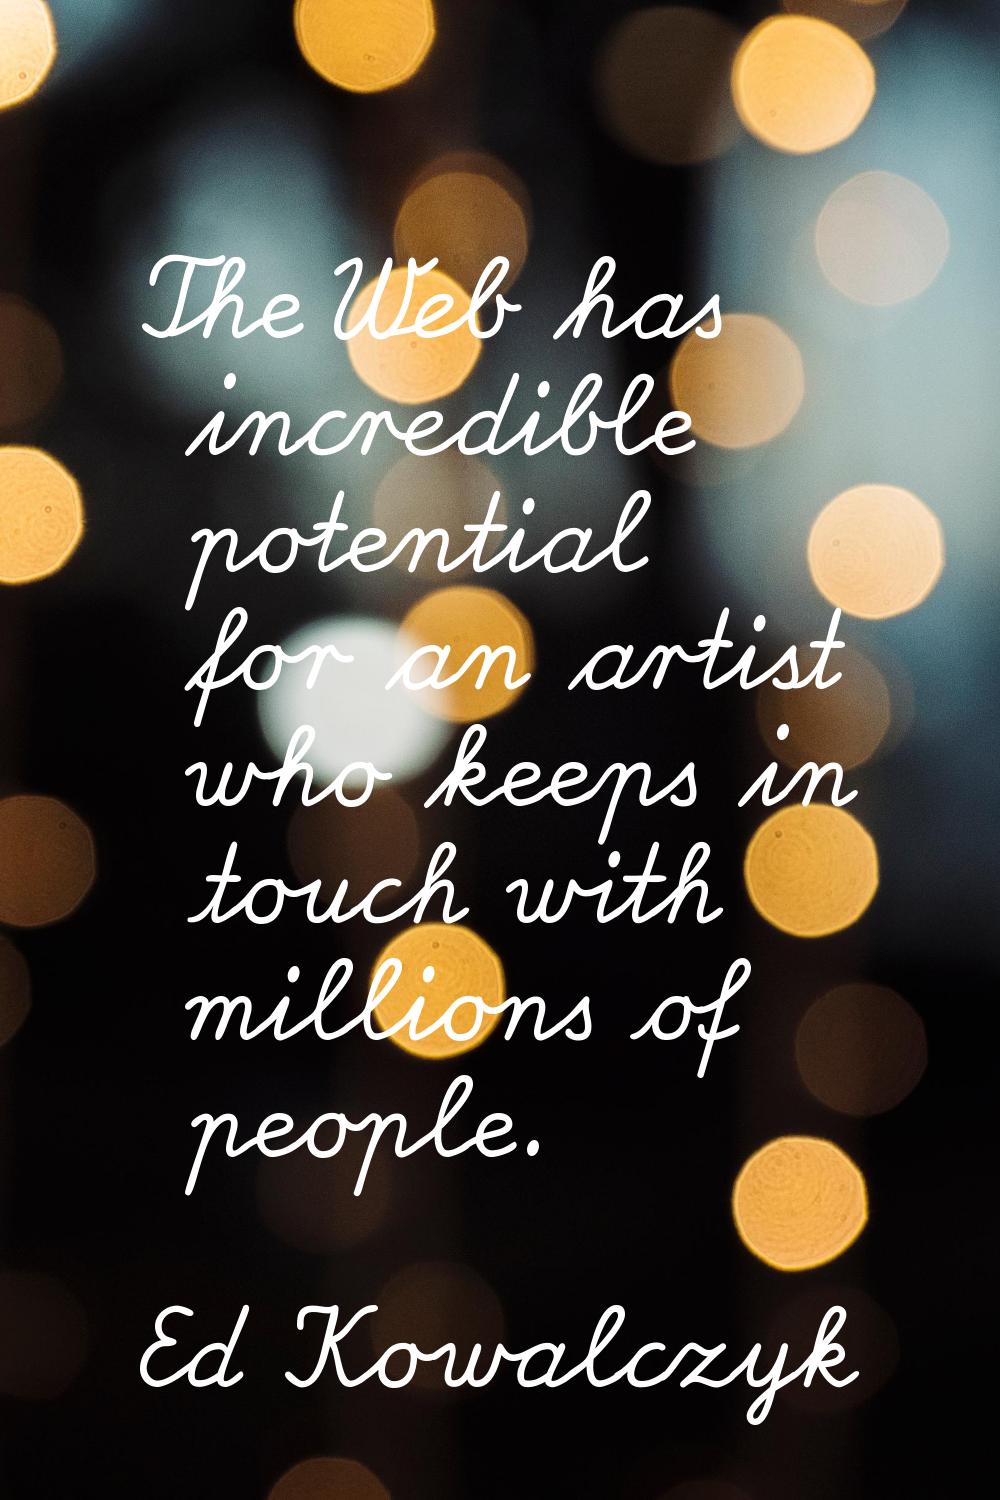 The Web has incredible potential for an artist who keeps in touch with millions of people.